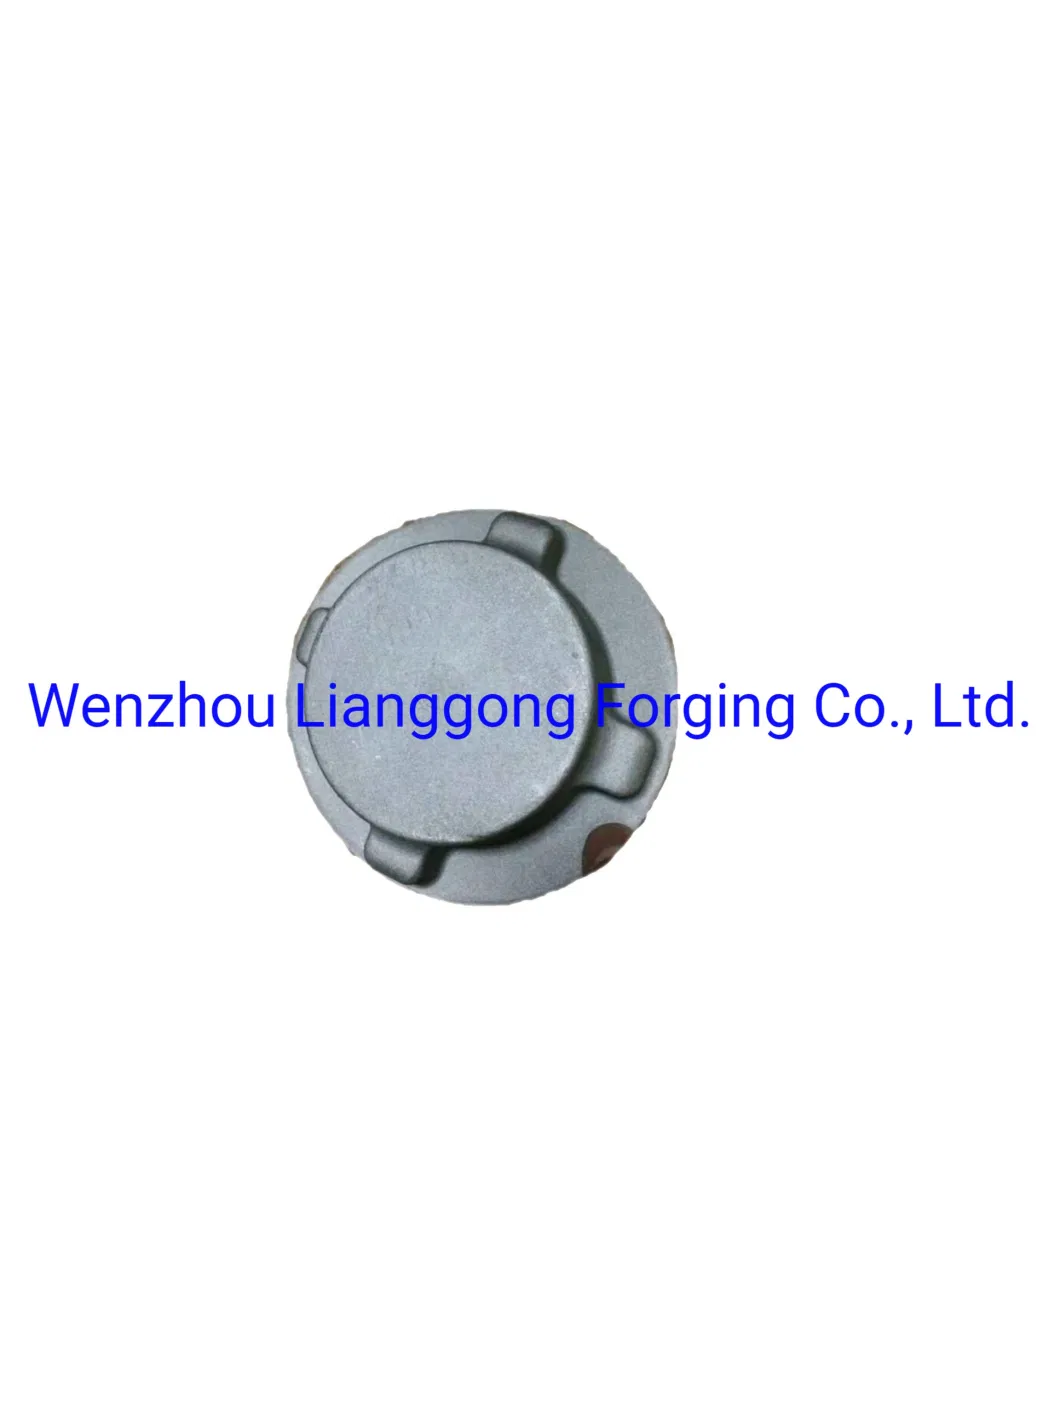 Custom Hot Die Forging/Forged Aluminum Parts in Automobile, Construction Machinery, Agricultural Machinery, Vehicle, Valve, Auto